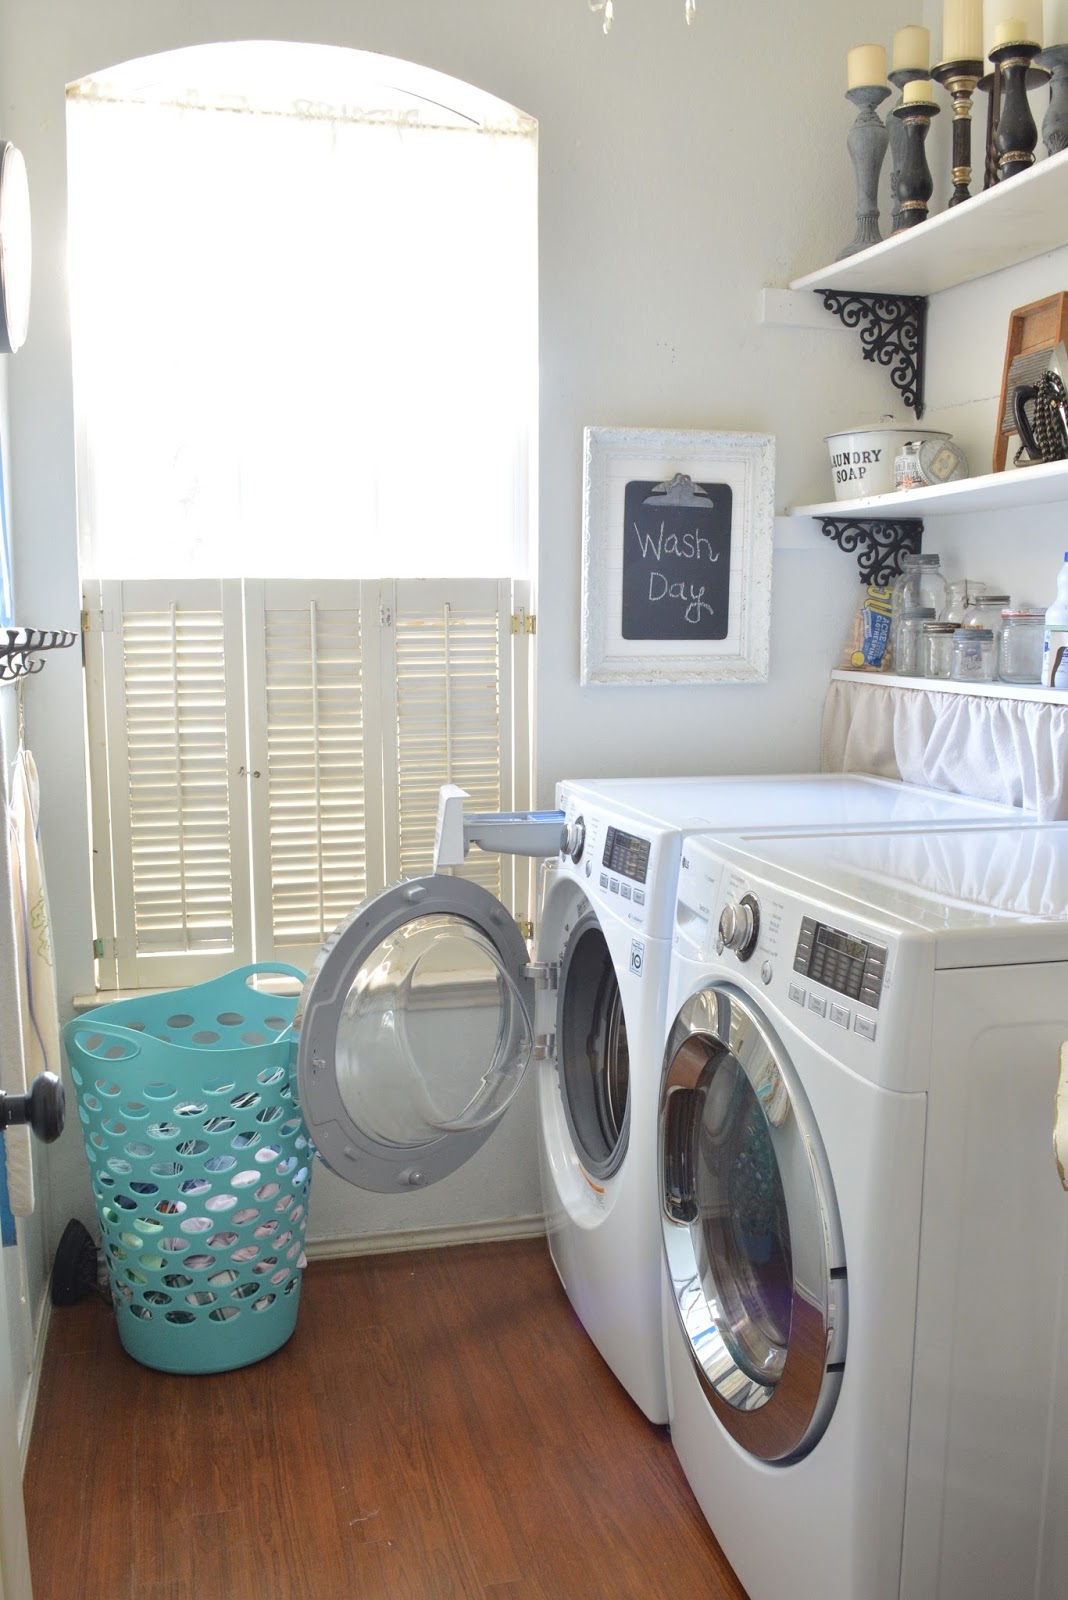 Let's Add Sprinkles: Thoughts About Our Front Load Washer and Dryer